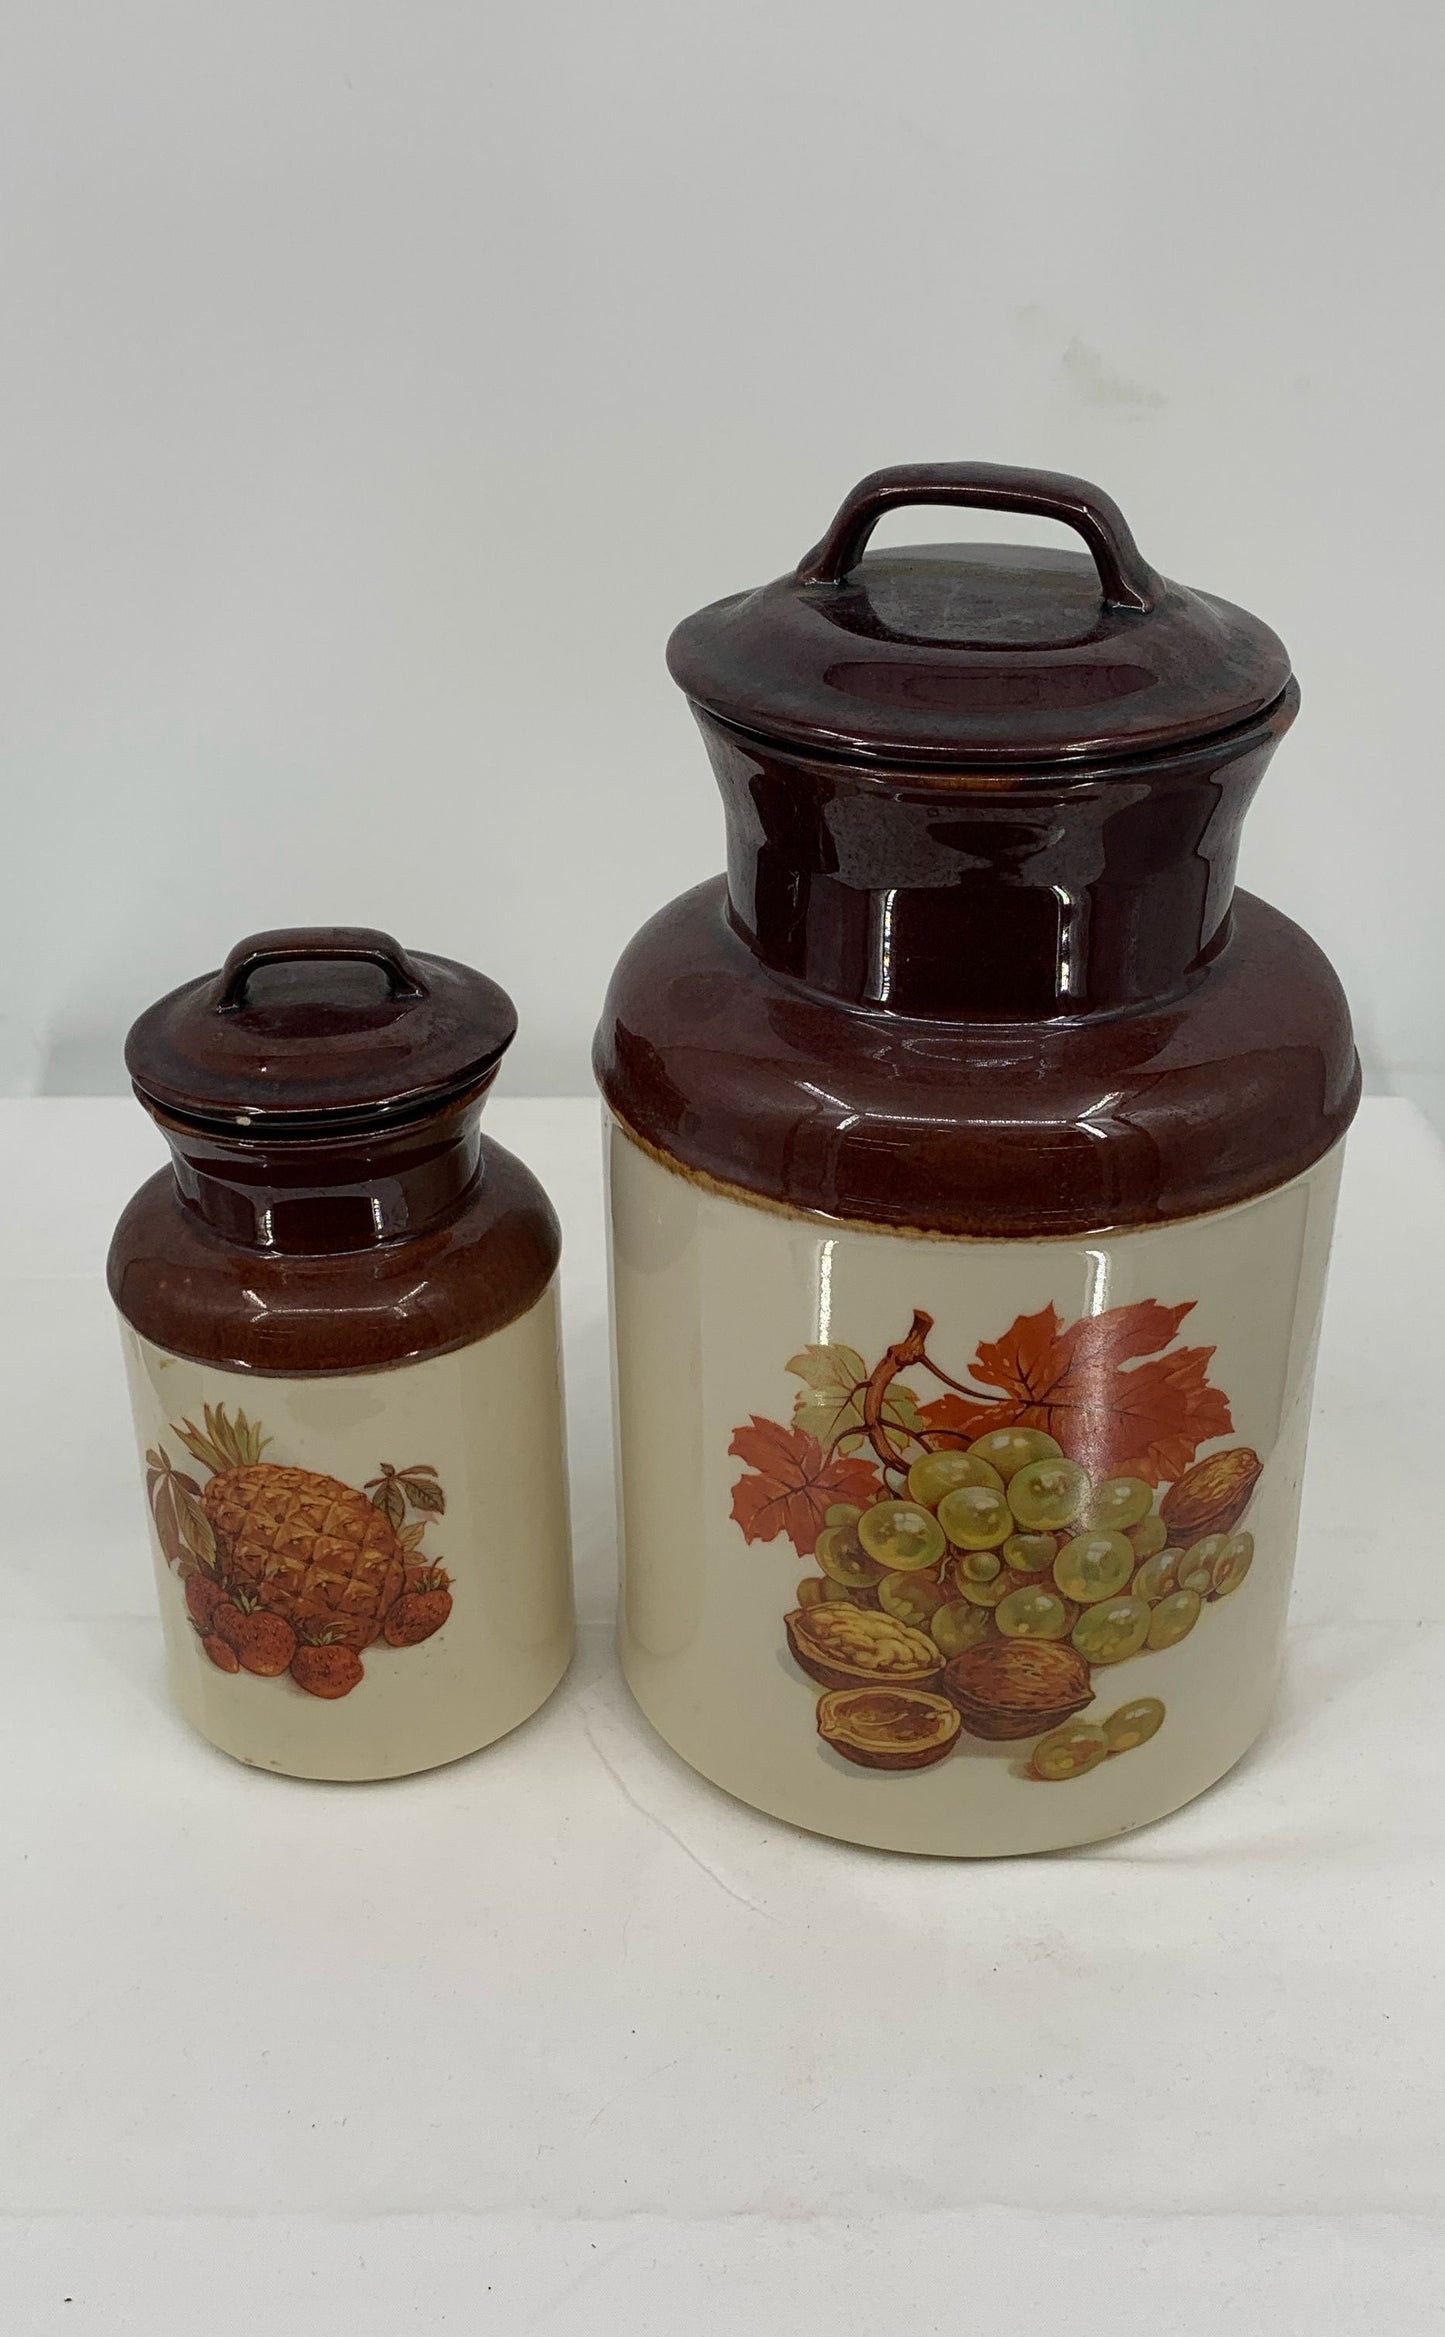 Vintage McCoy 10.5" And 6.75" Canister Set Of 2 #253 And 251 Made In The U.S.A.